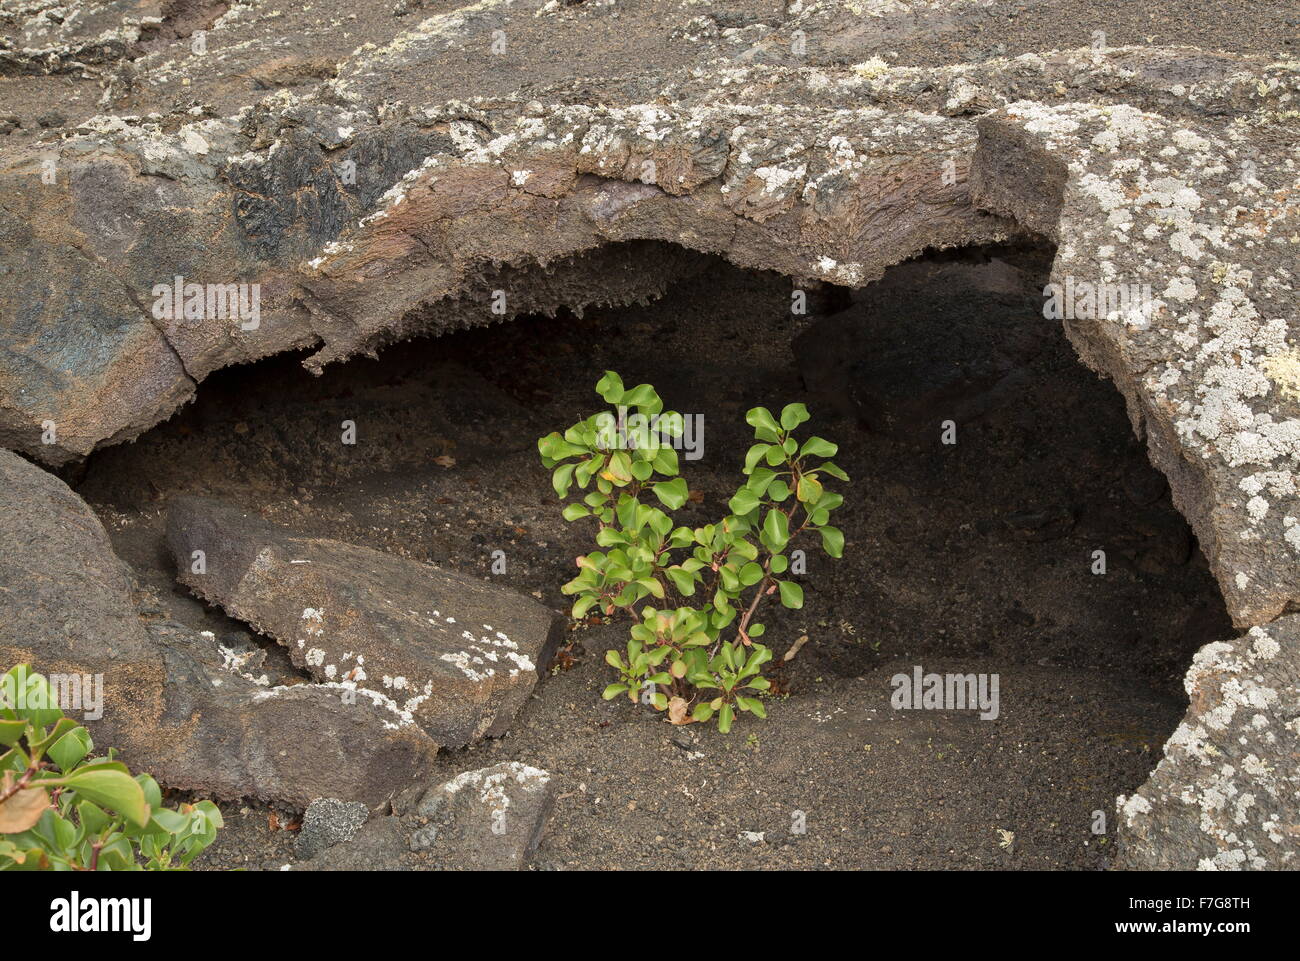 Canary sorrel, Rumex lunaria, growing on cinder, in lava tunnel, Timanfaya National Park, central Lanzarote. Stock Photo